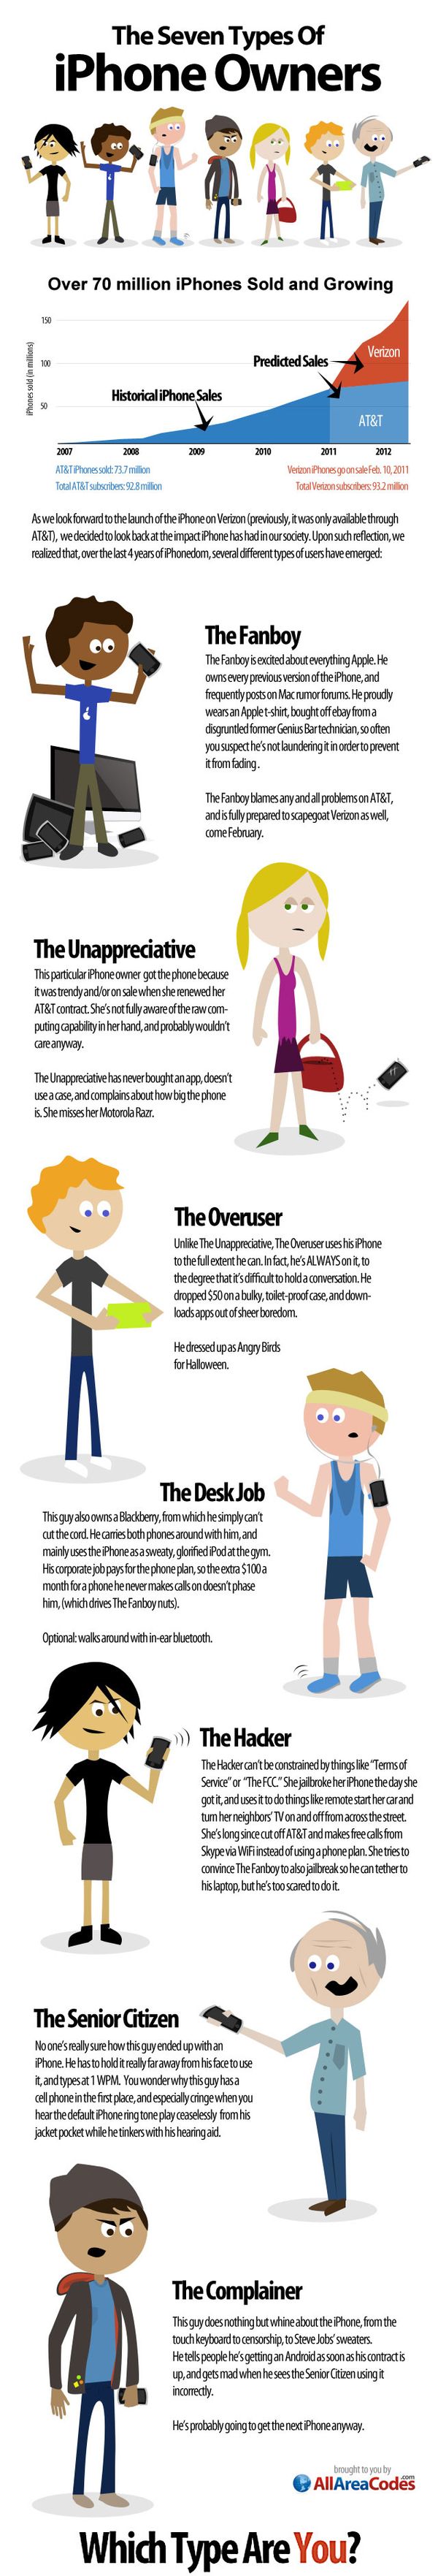 The 7 Types Of iPhone Owners [Infographic]